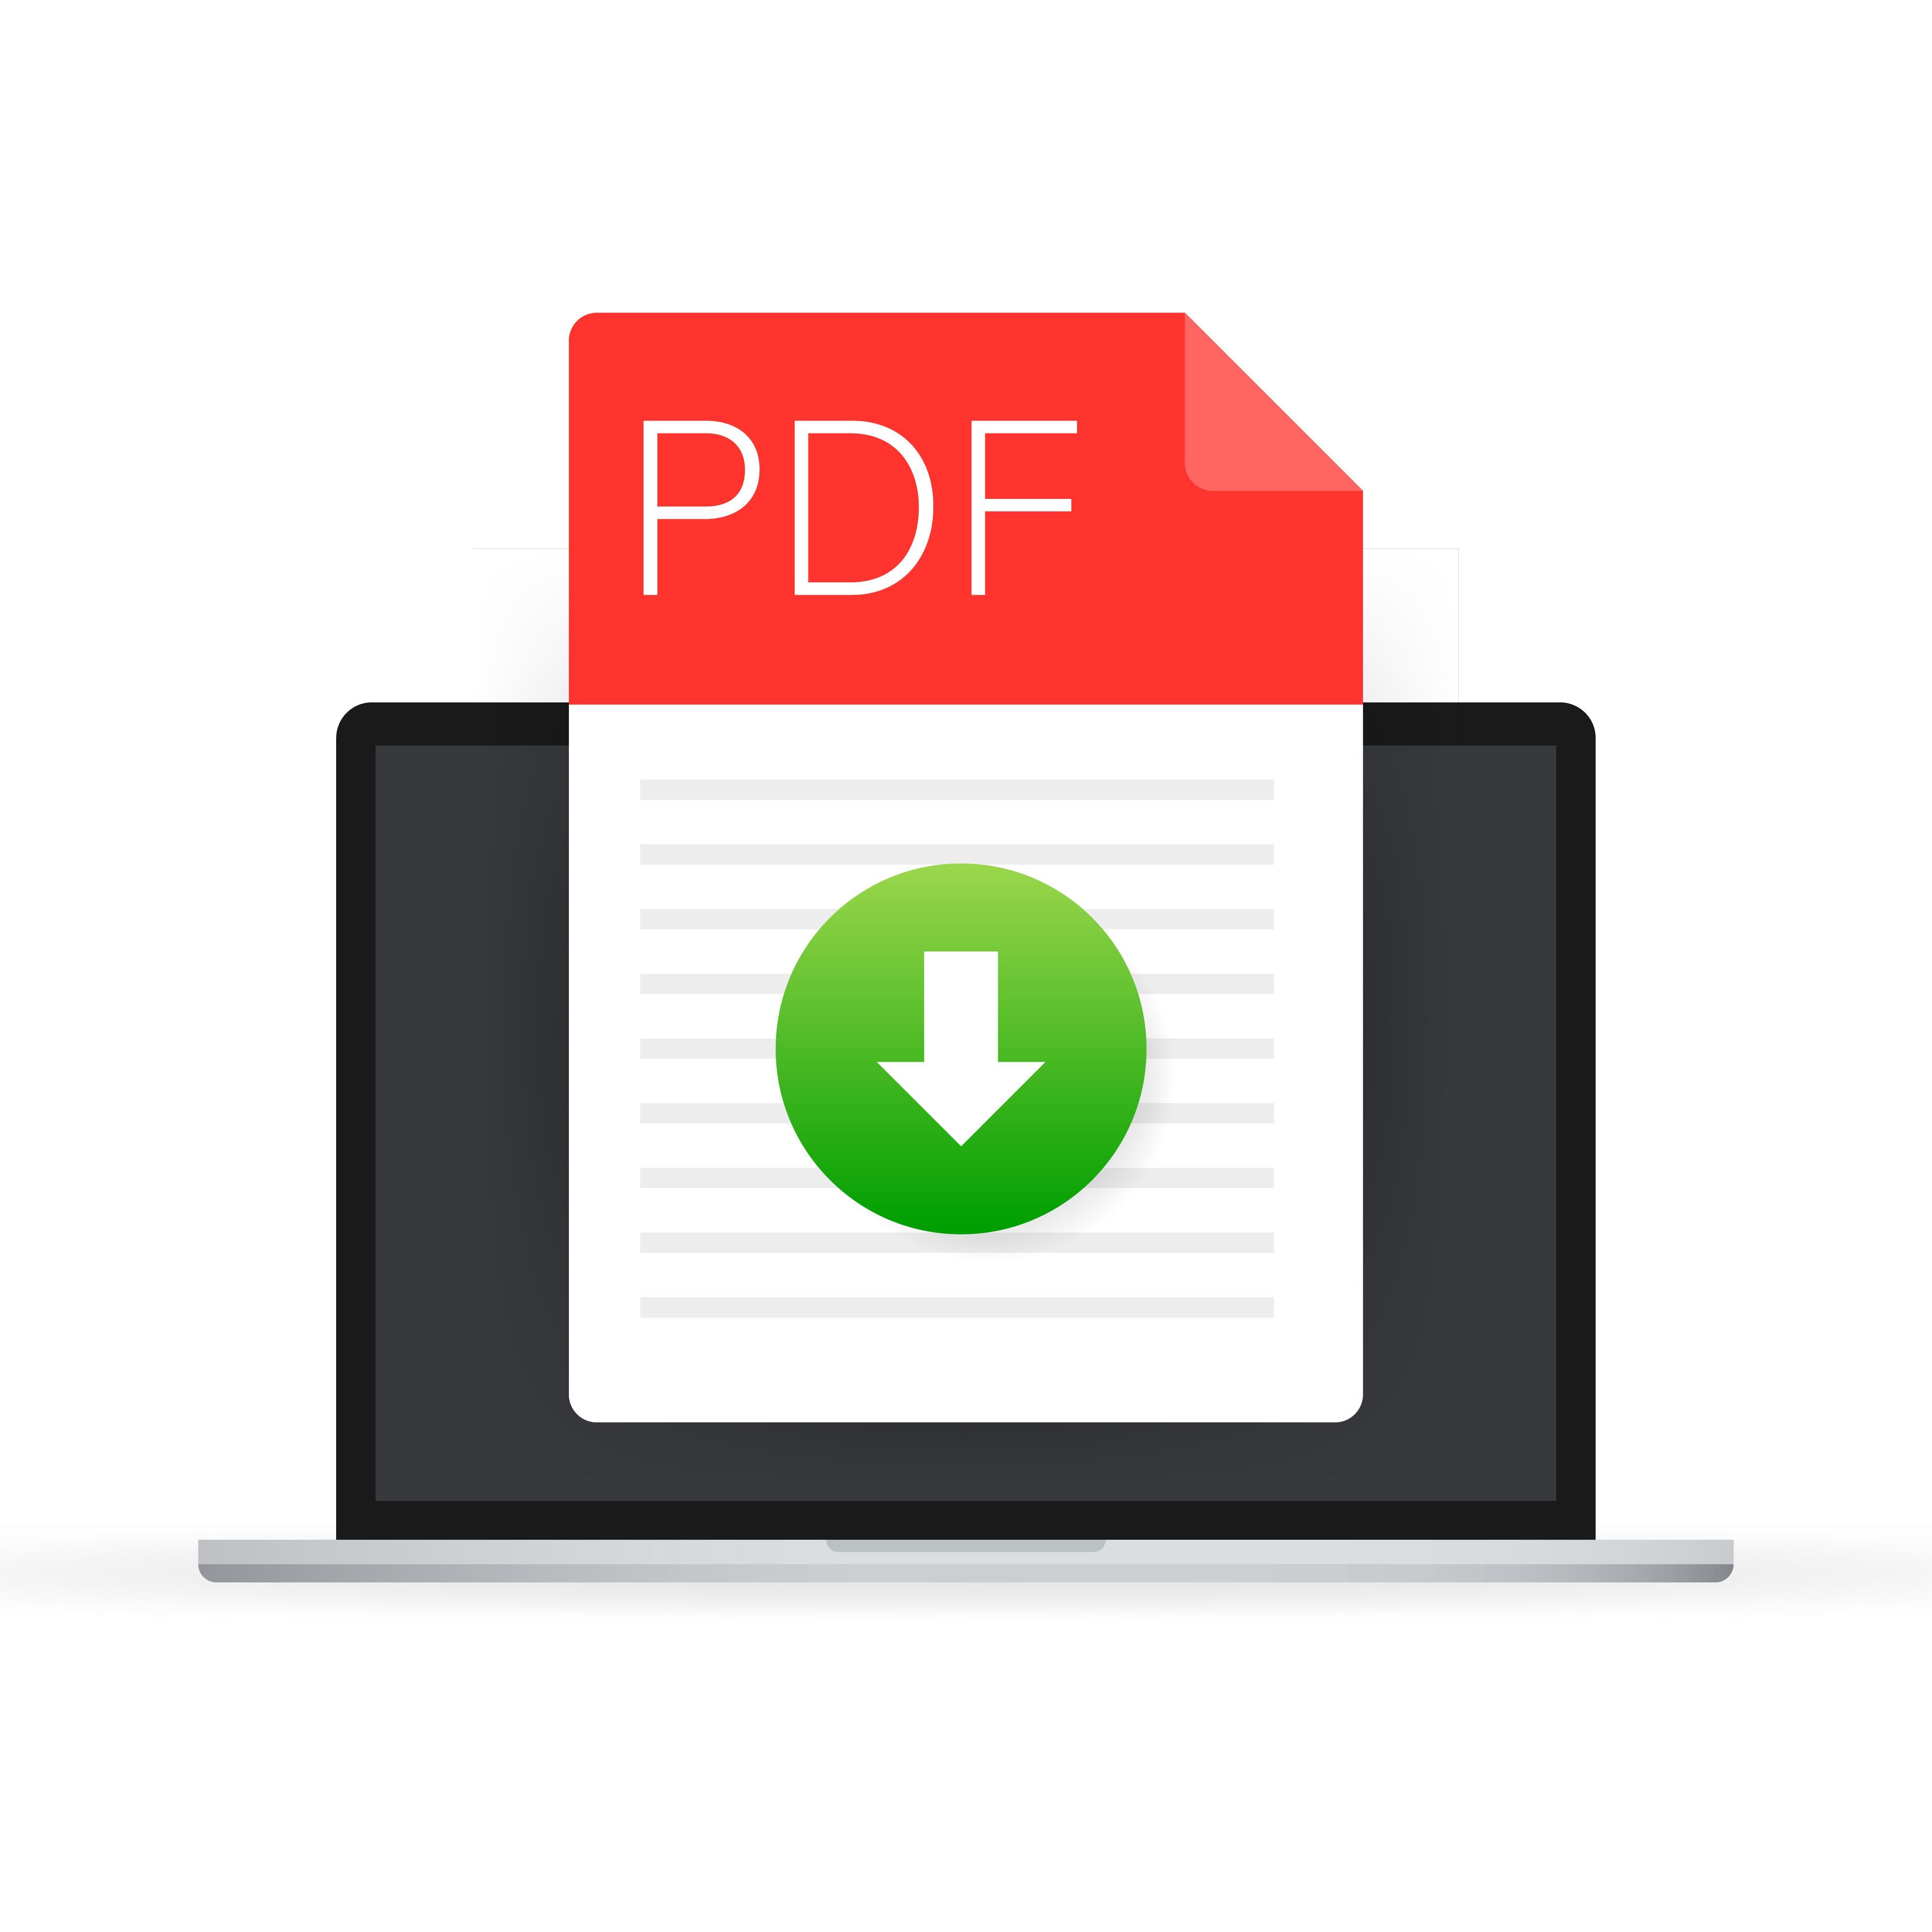 Know Your PDF